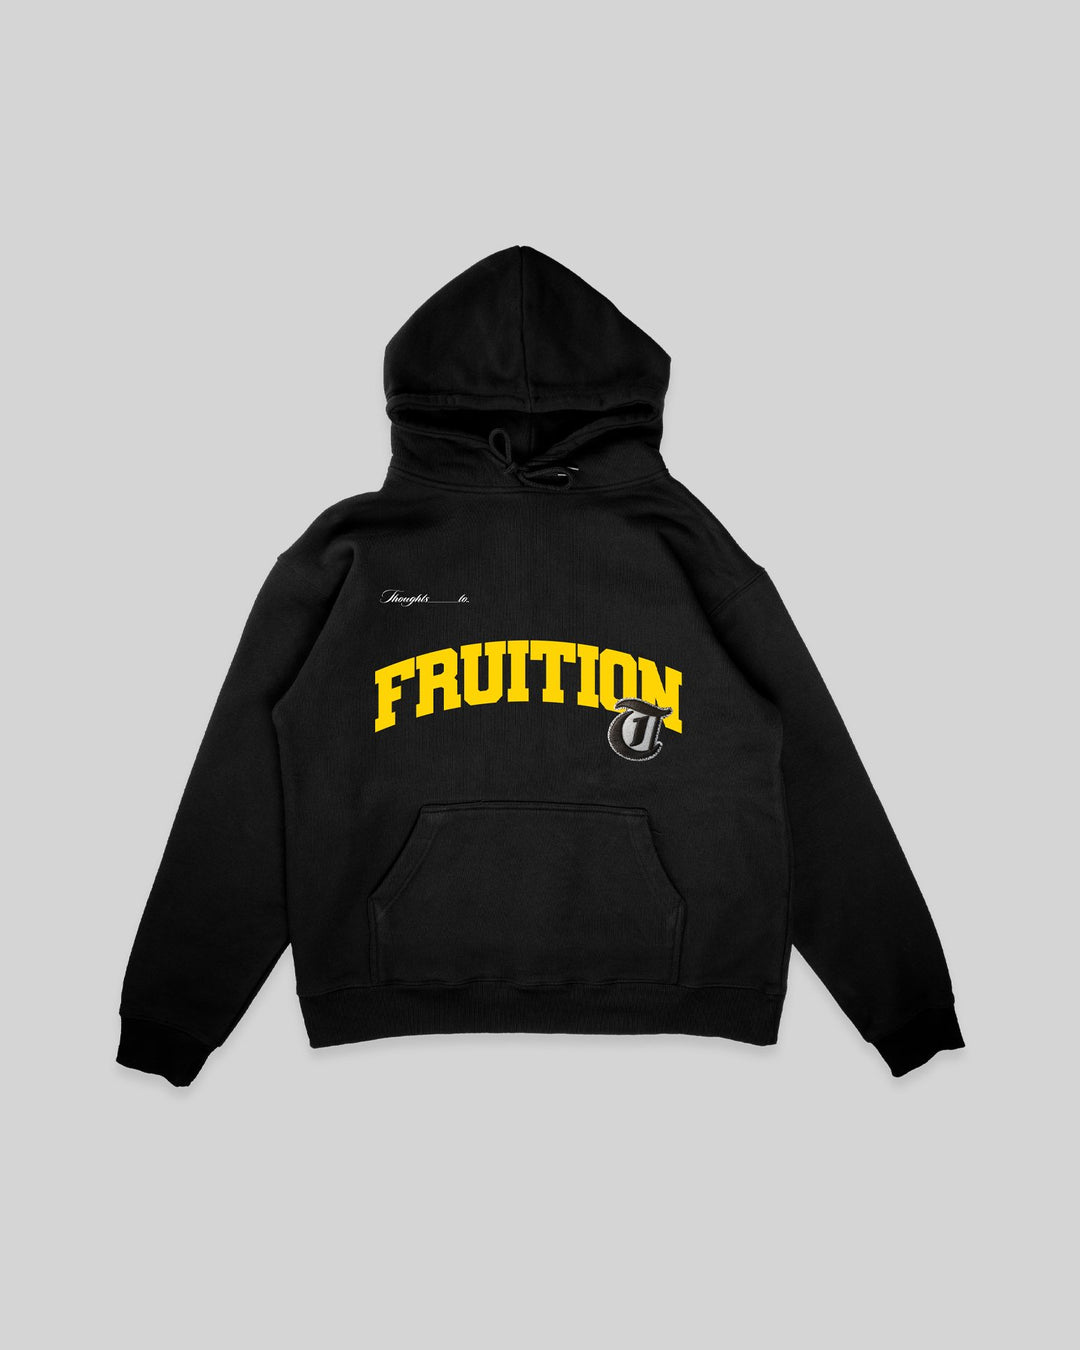 Fruition Applique Black Hoodie - trainofthoughtcollective